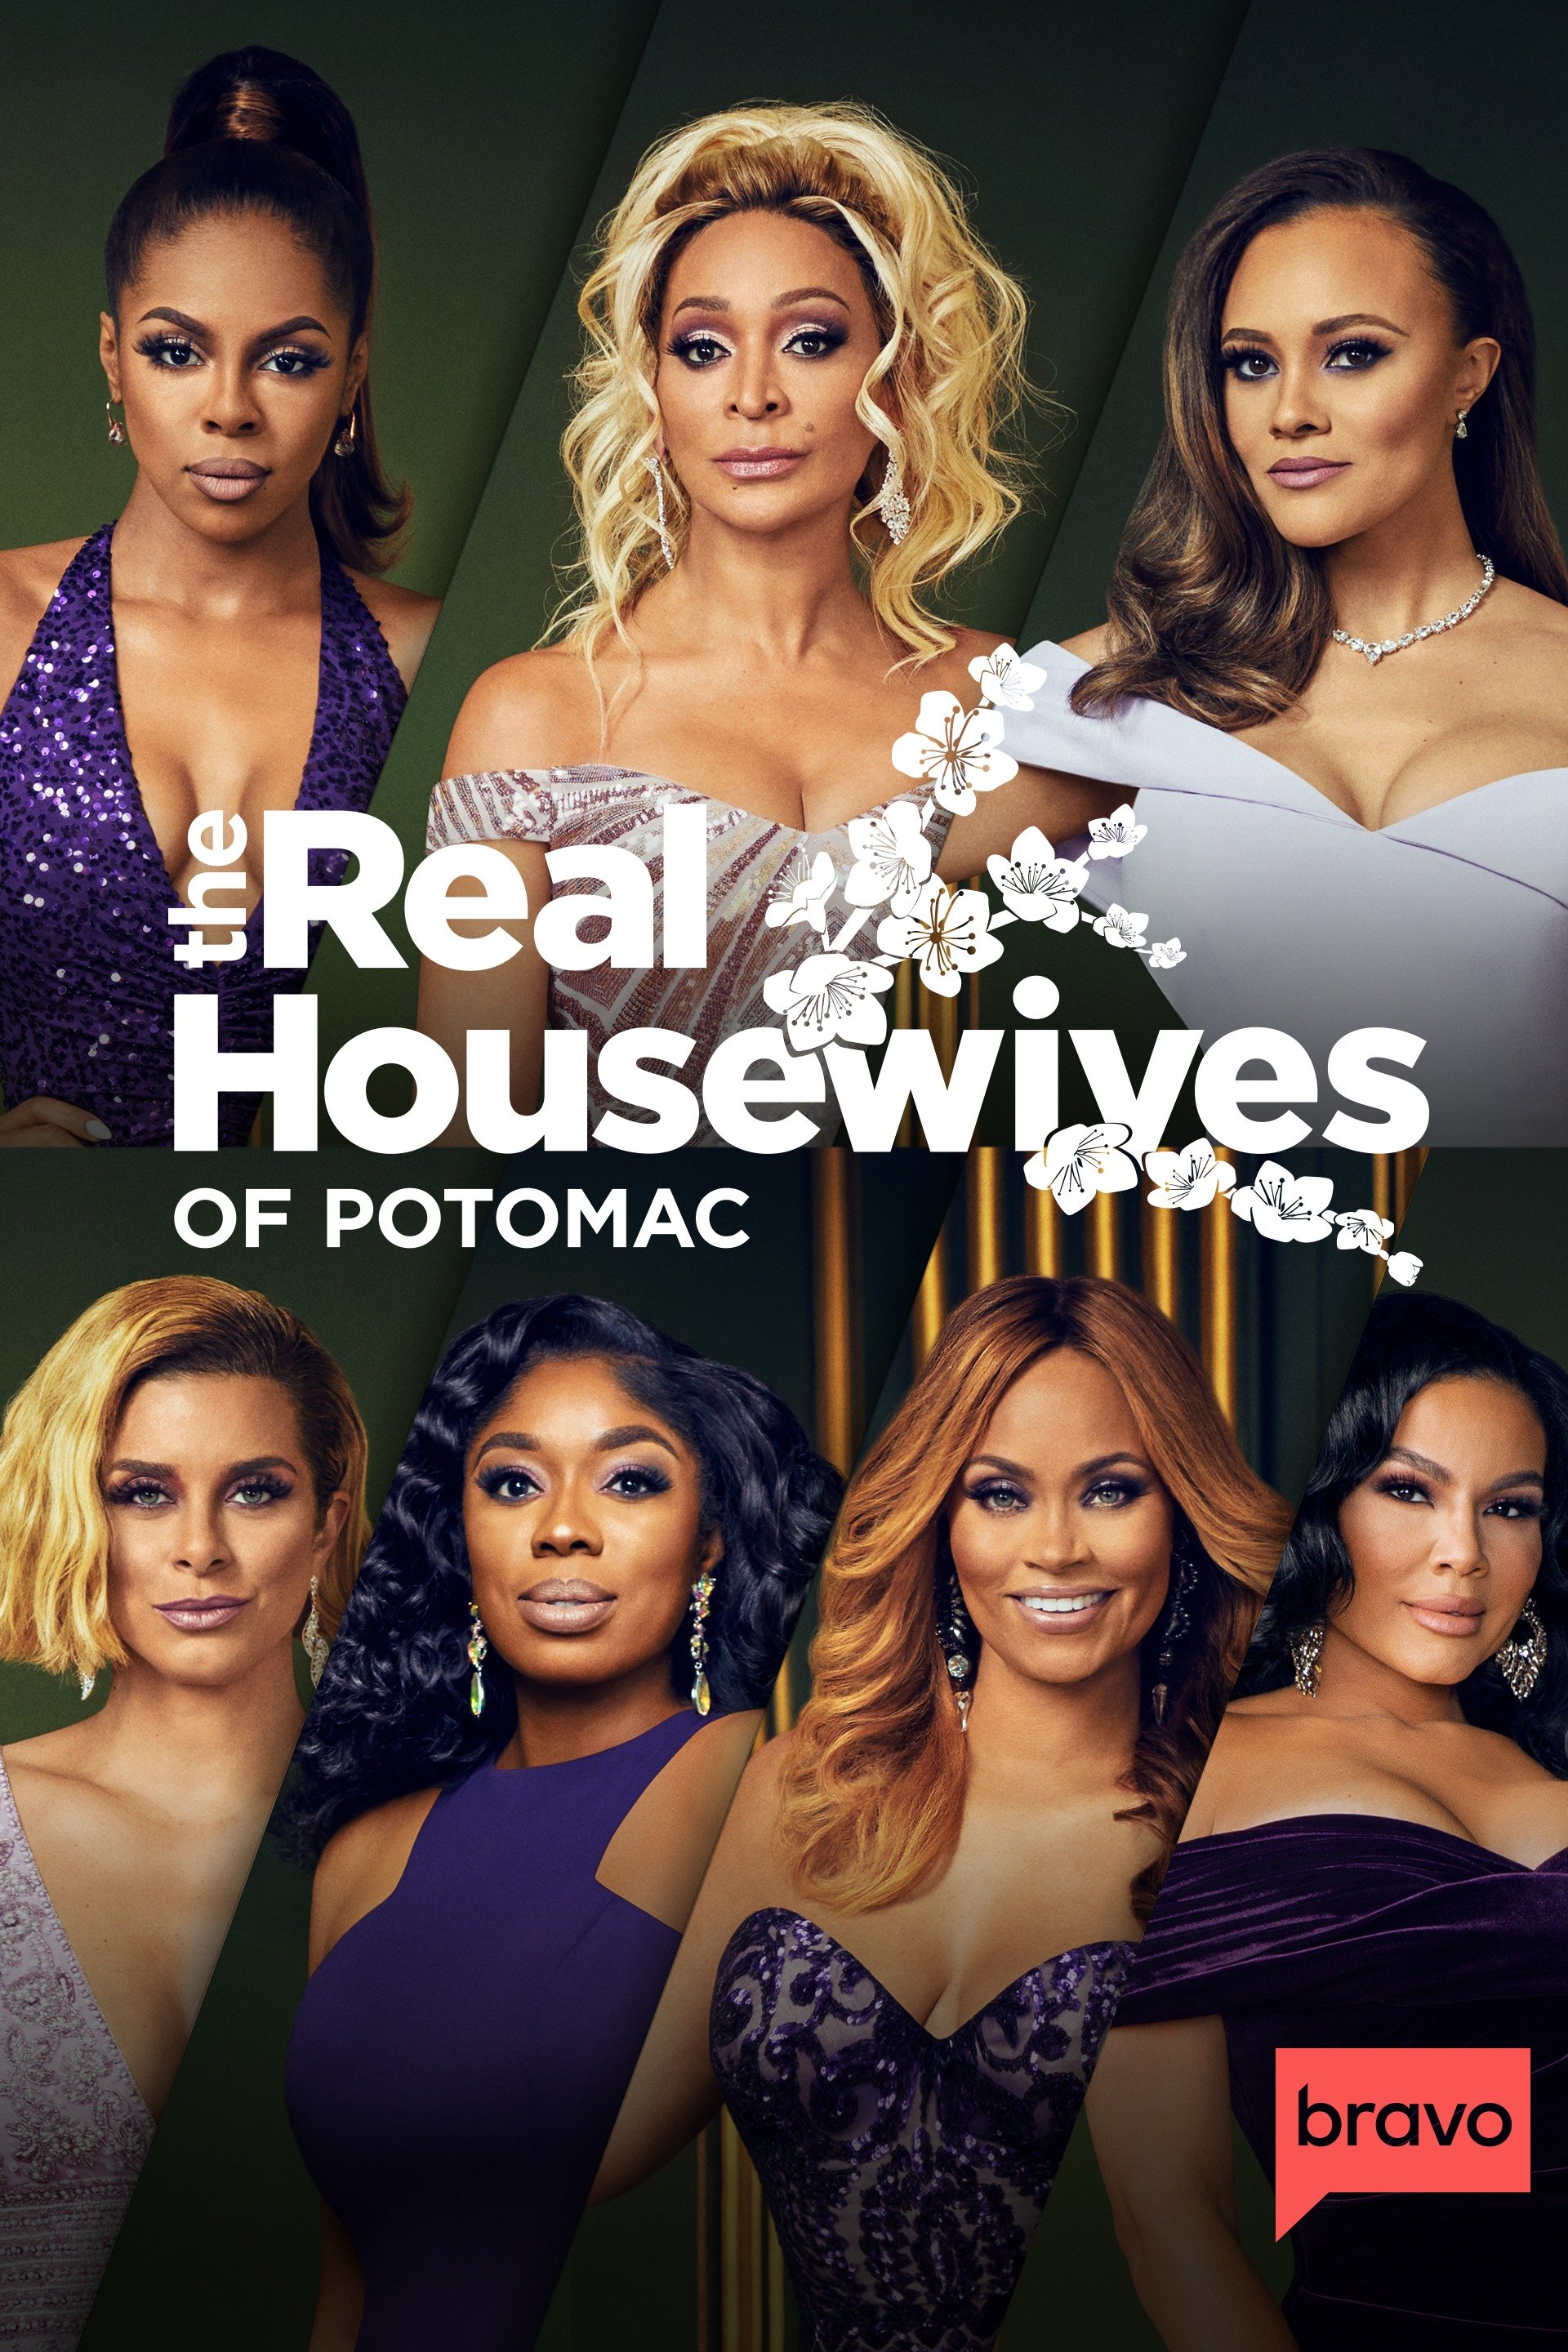 The Real Housewives of Potomac image pic